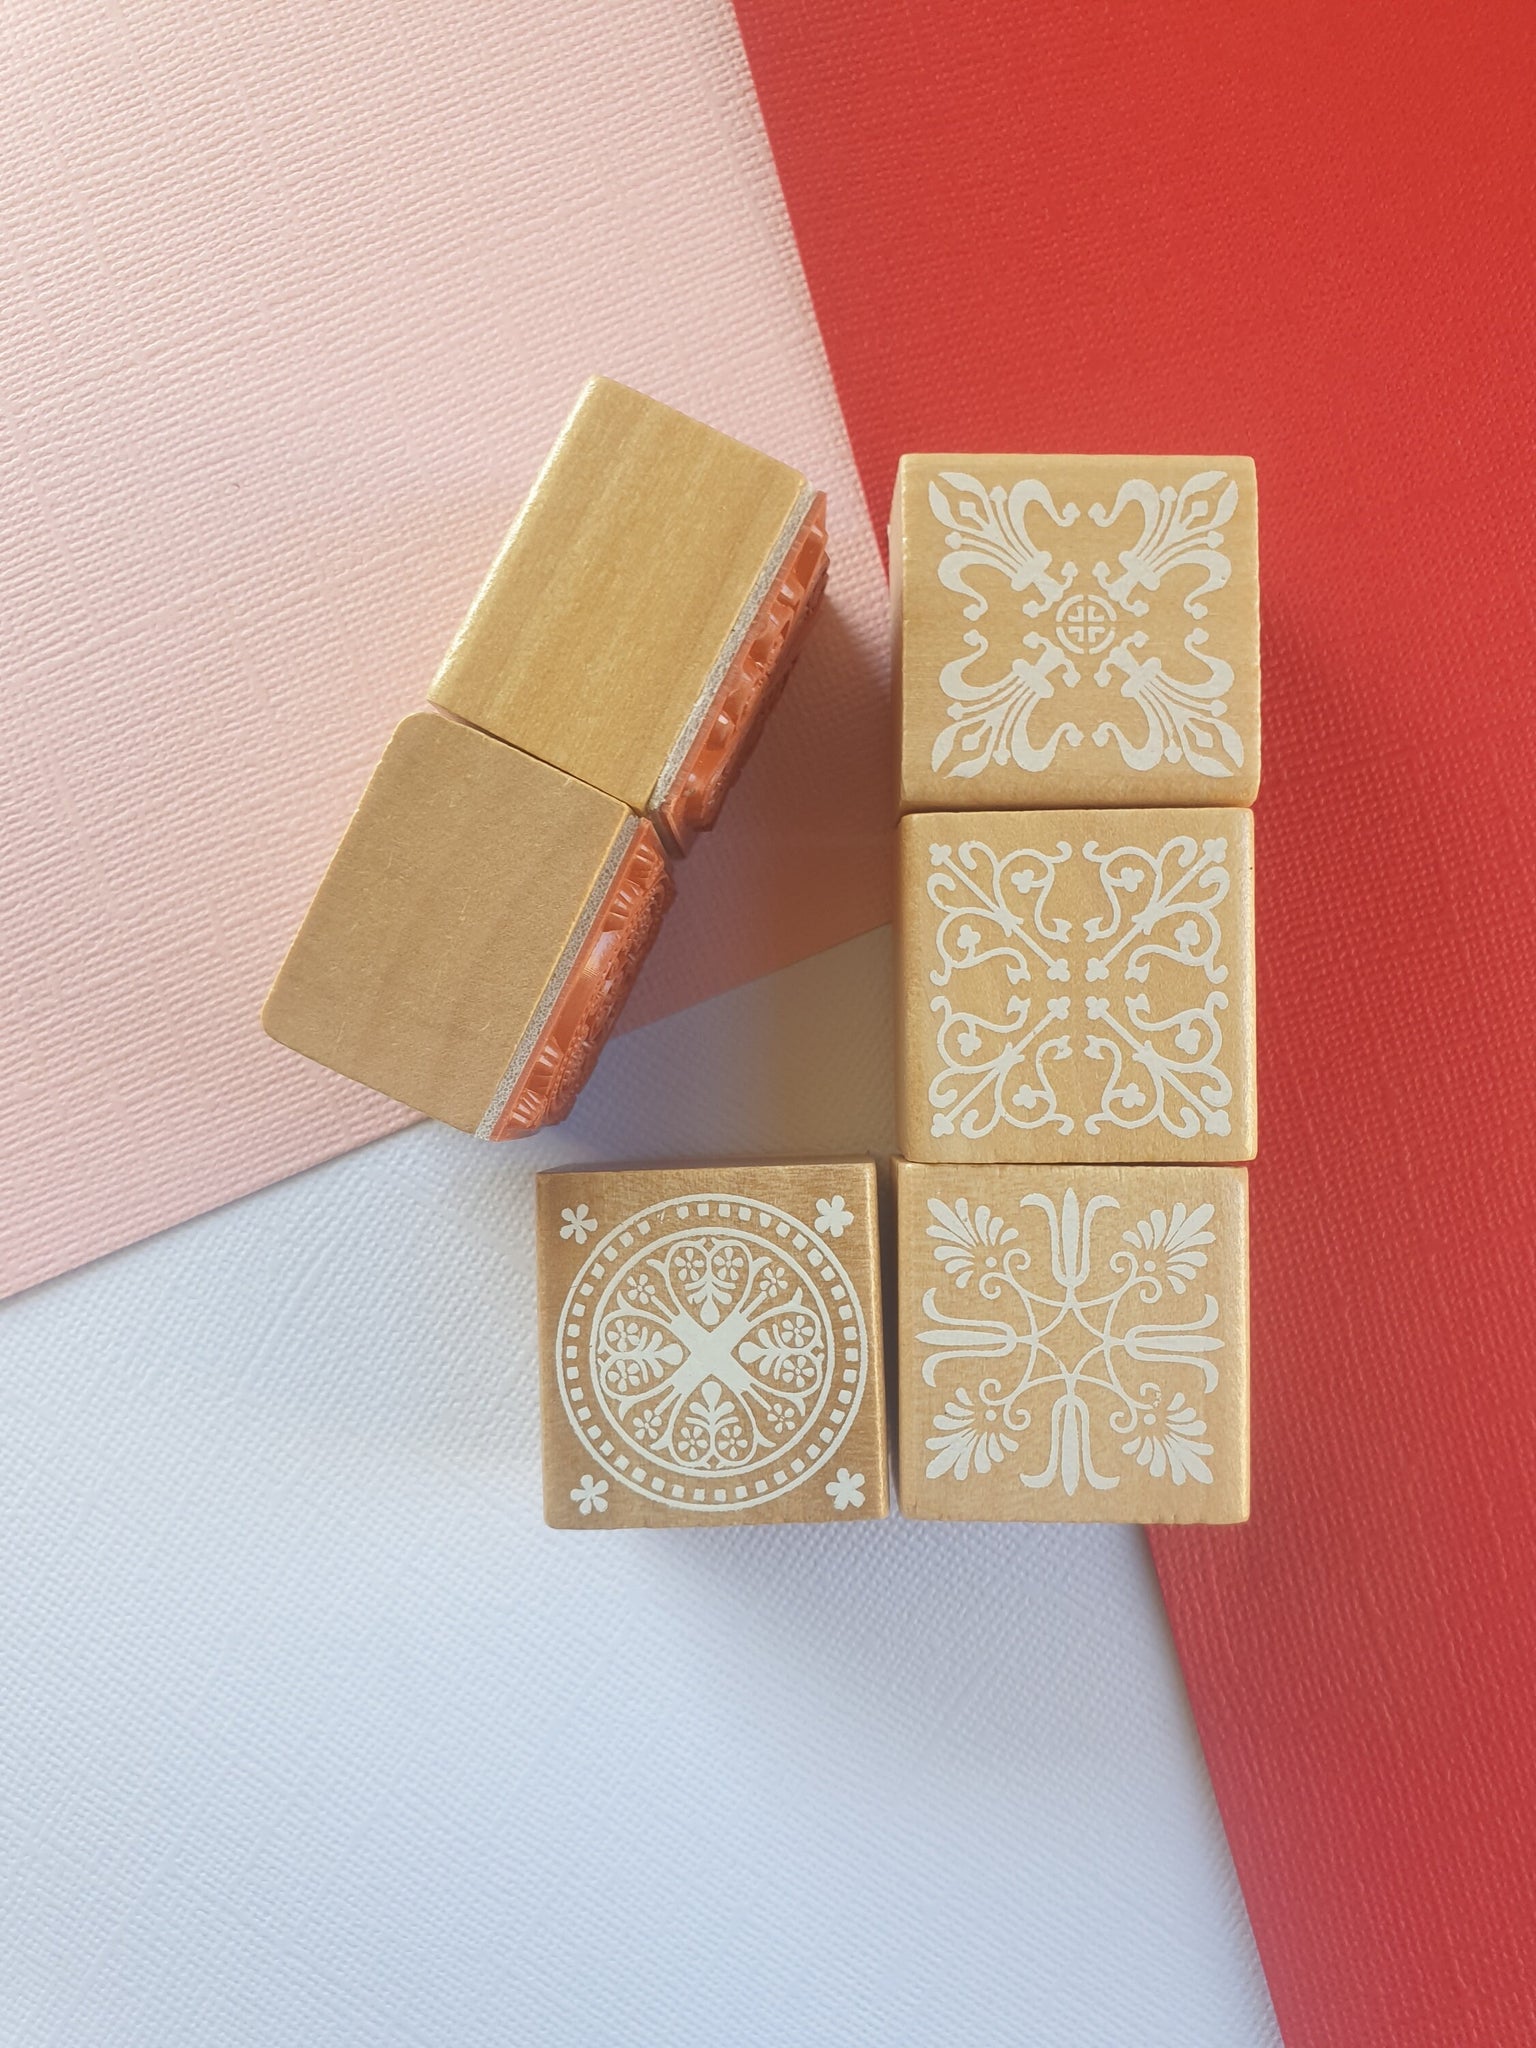 6pcs 3cm Square Emboss Stamp, Mandala stamp, Lace Texture for craft, Sculpture stamp for pottery, Polymer Clay tools, Wooden stamp Australia